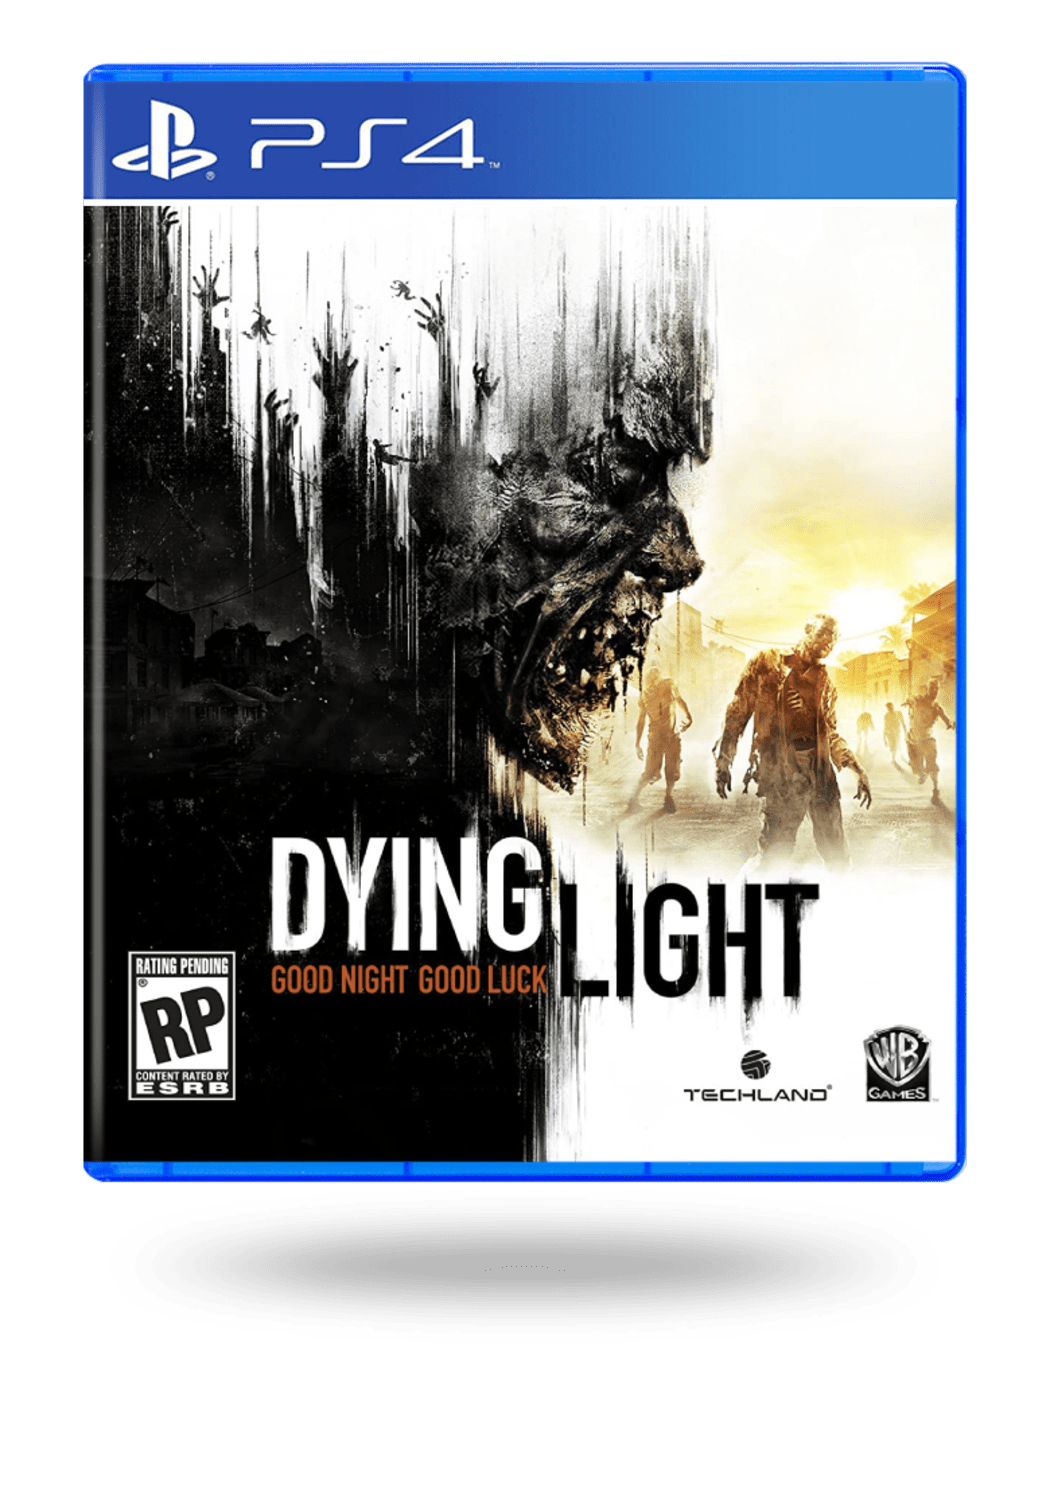 Ps3 light. Dying Light Xbox 360 диск. Dying Light 2 ps4 диск. Dying Light ps4 диск. Дайн Лайт 2 диск.